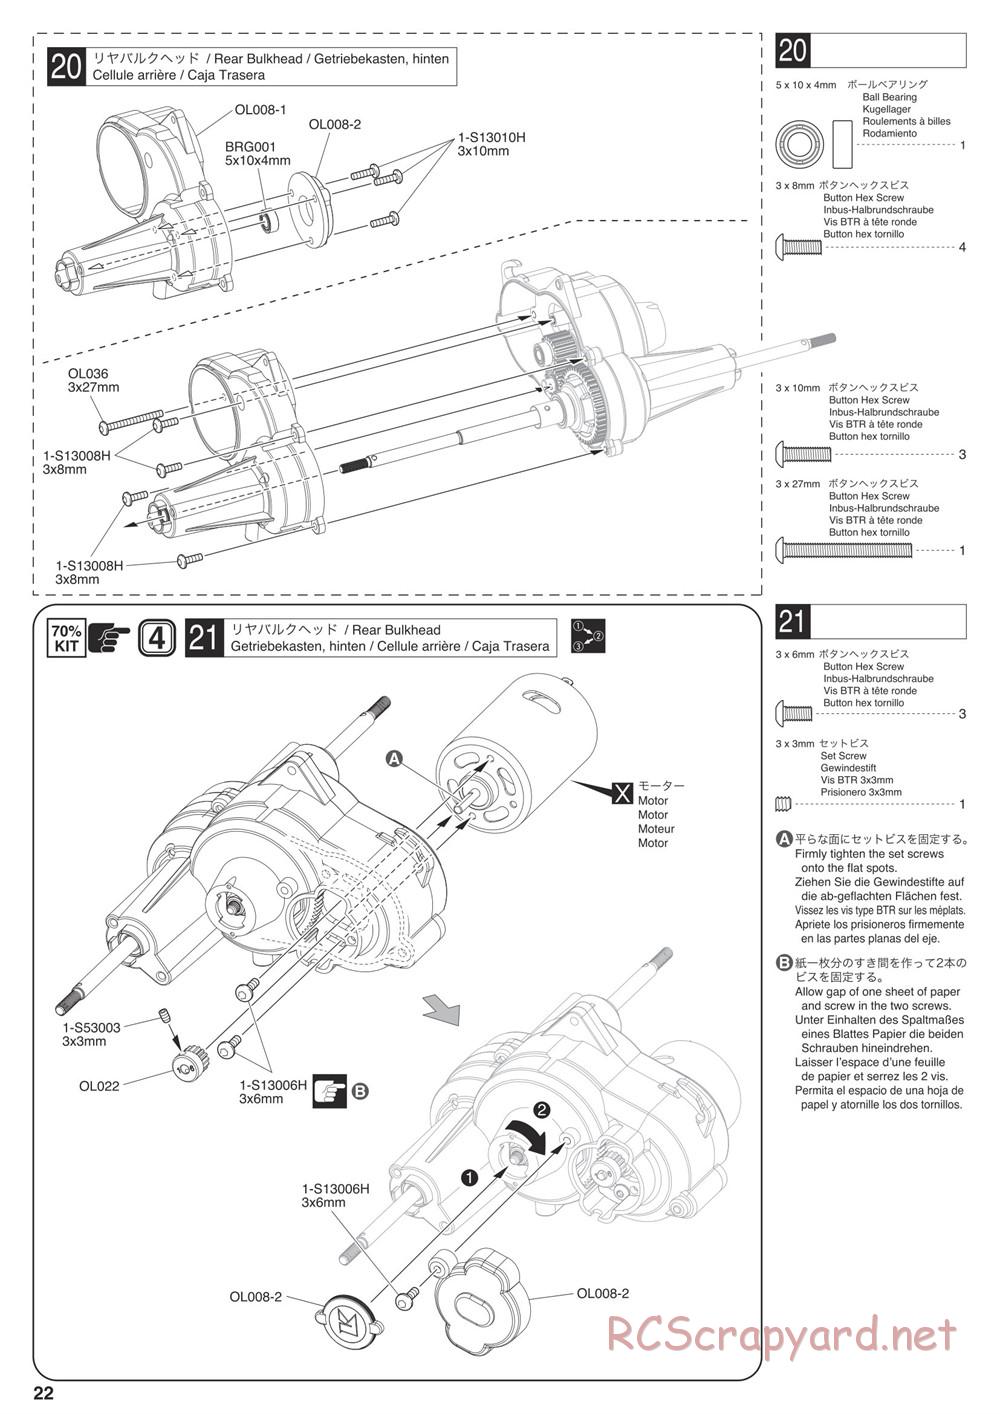 Kyosho - Outlaw Rampage Pro - Manual - Page 22